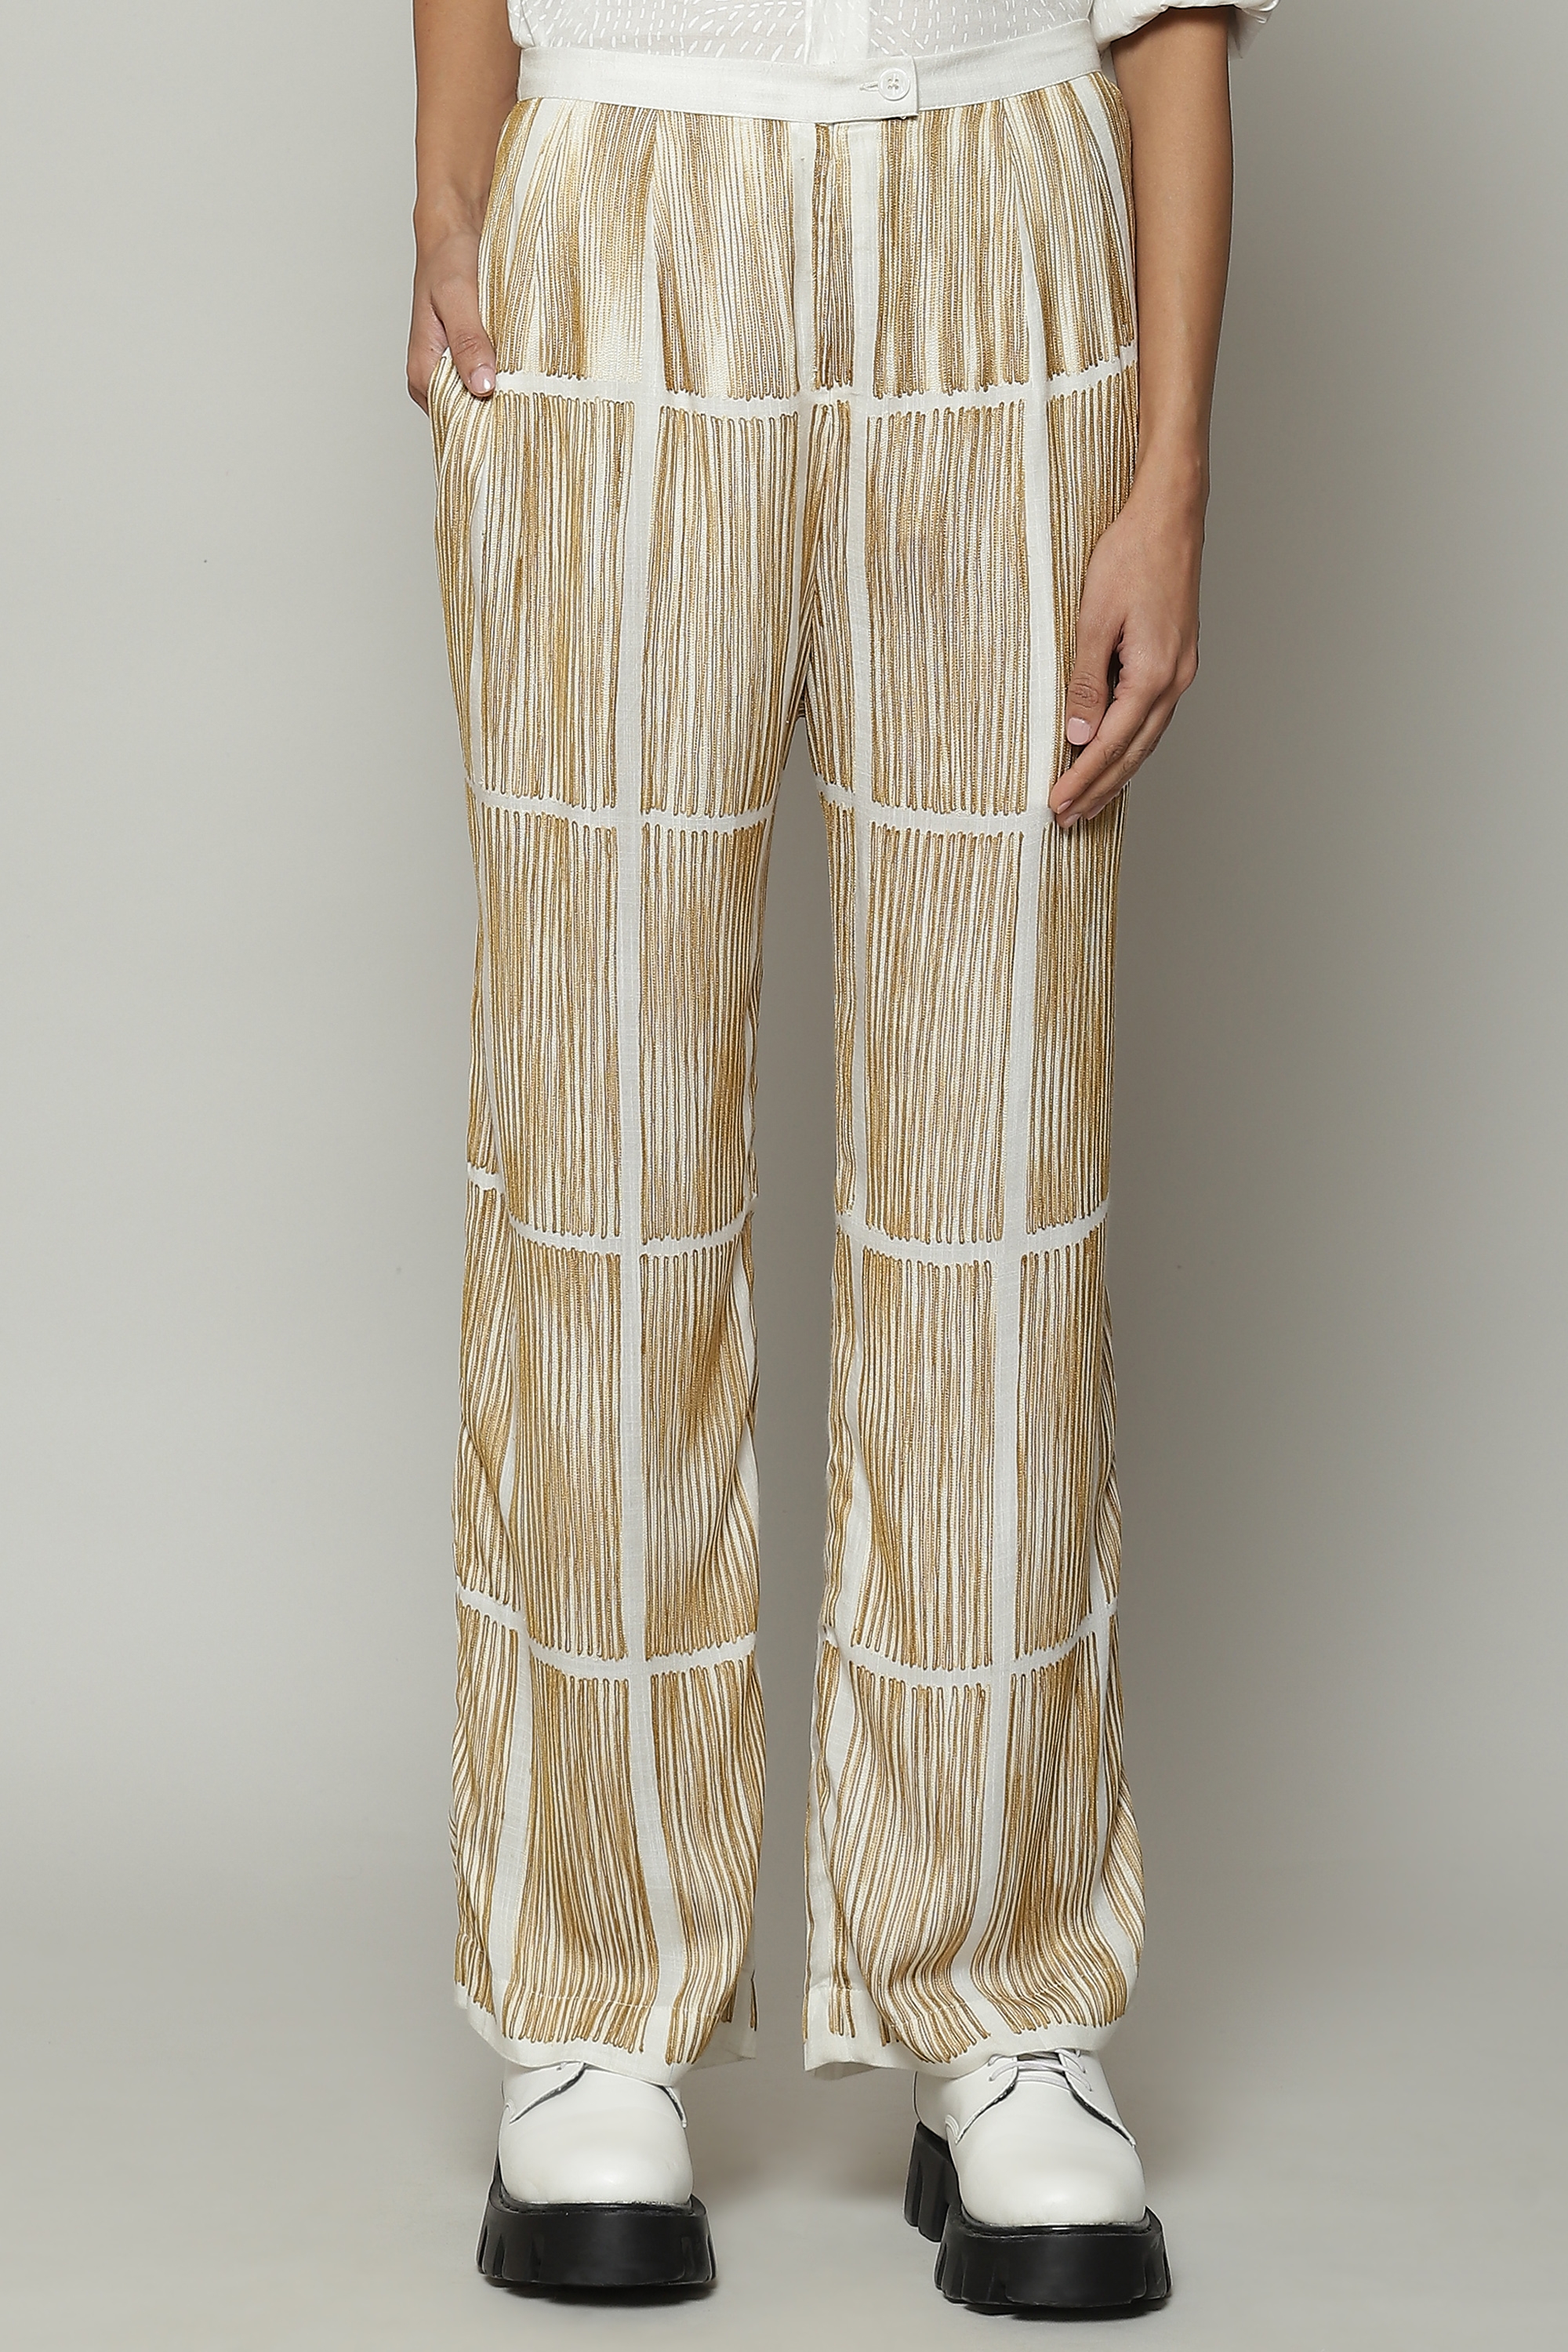 ABRAHAM AND THAKORE | Crewel Embroidered Cotton Pant Ivory Parchment